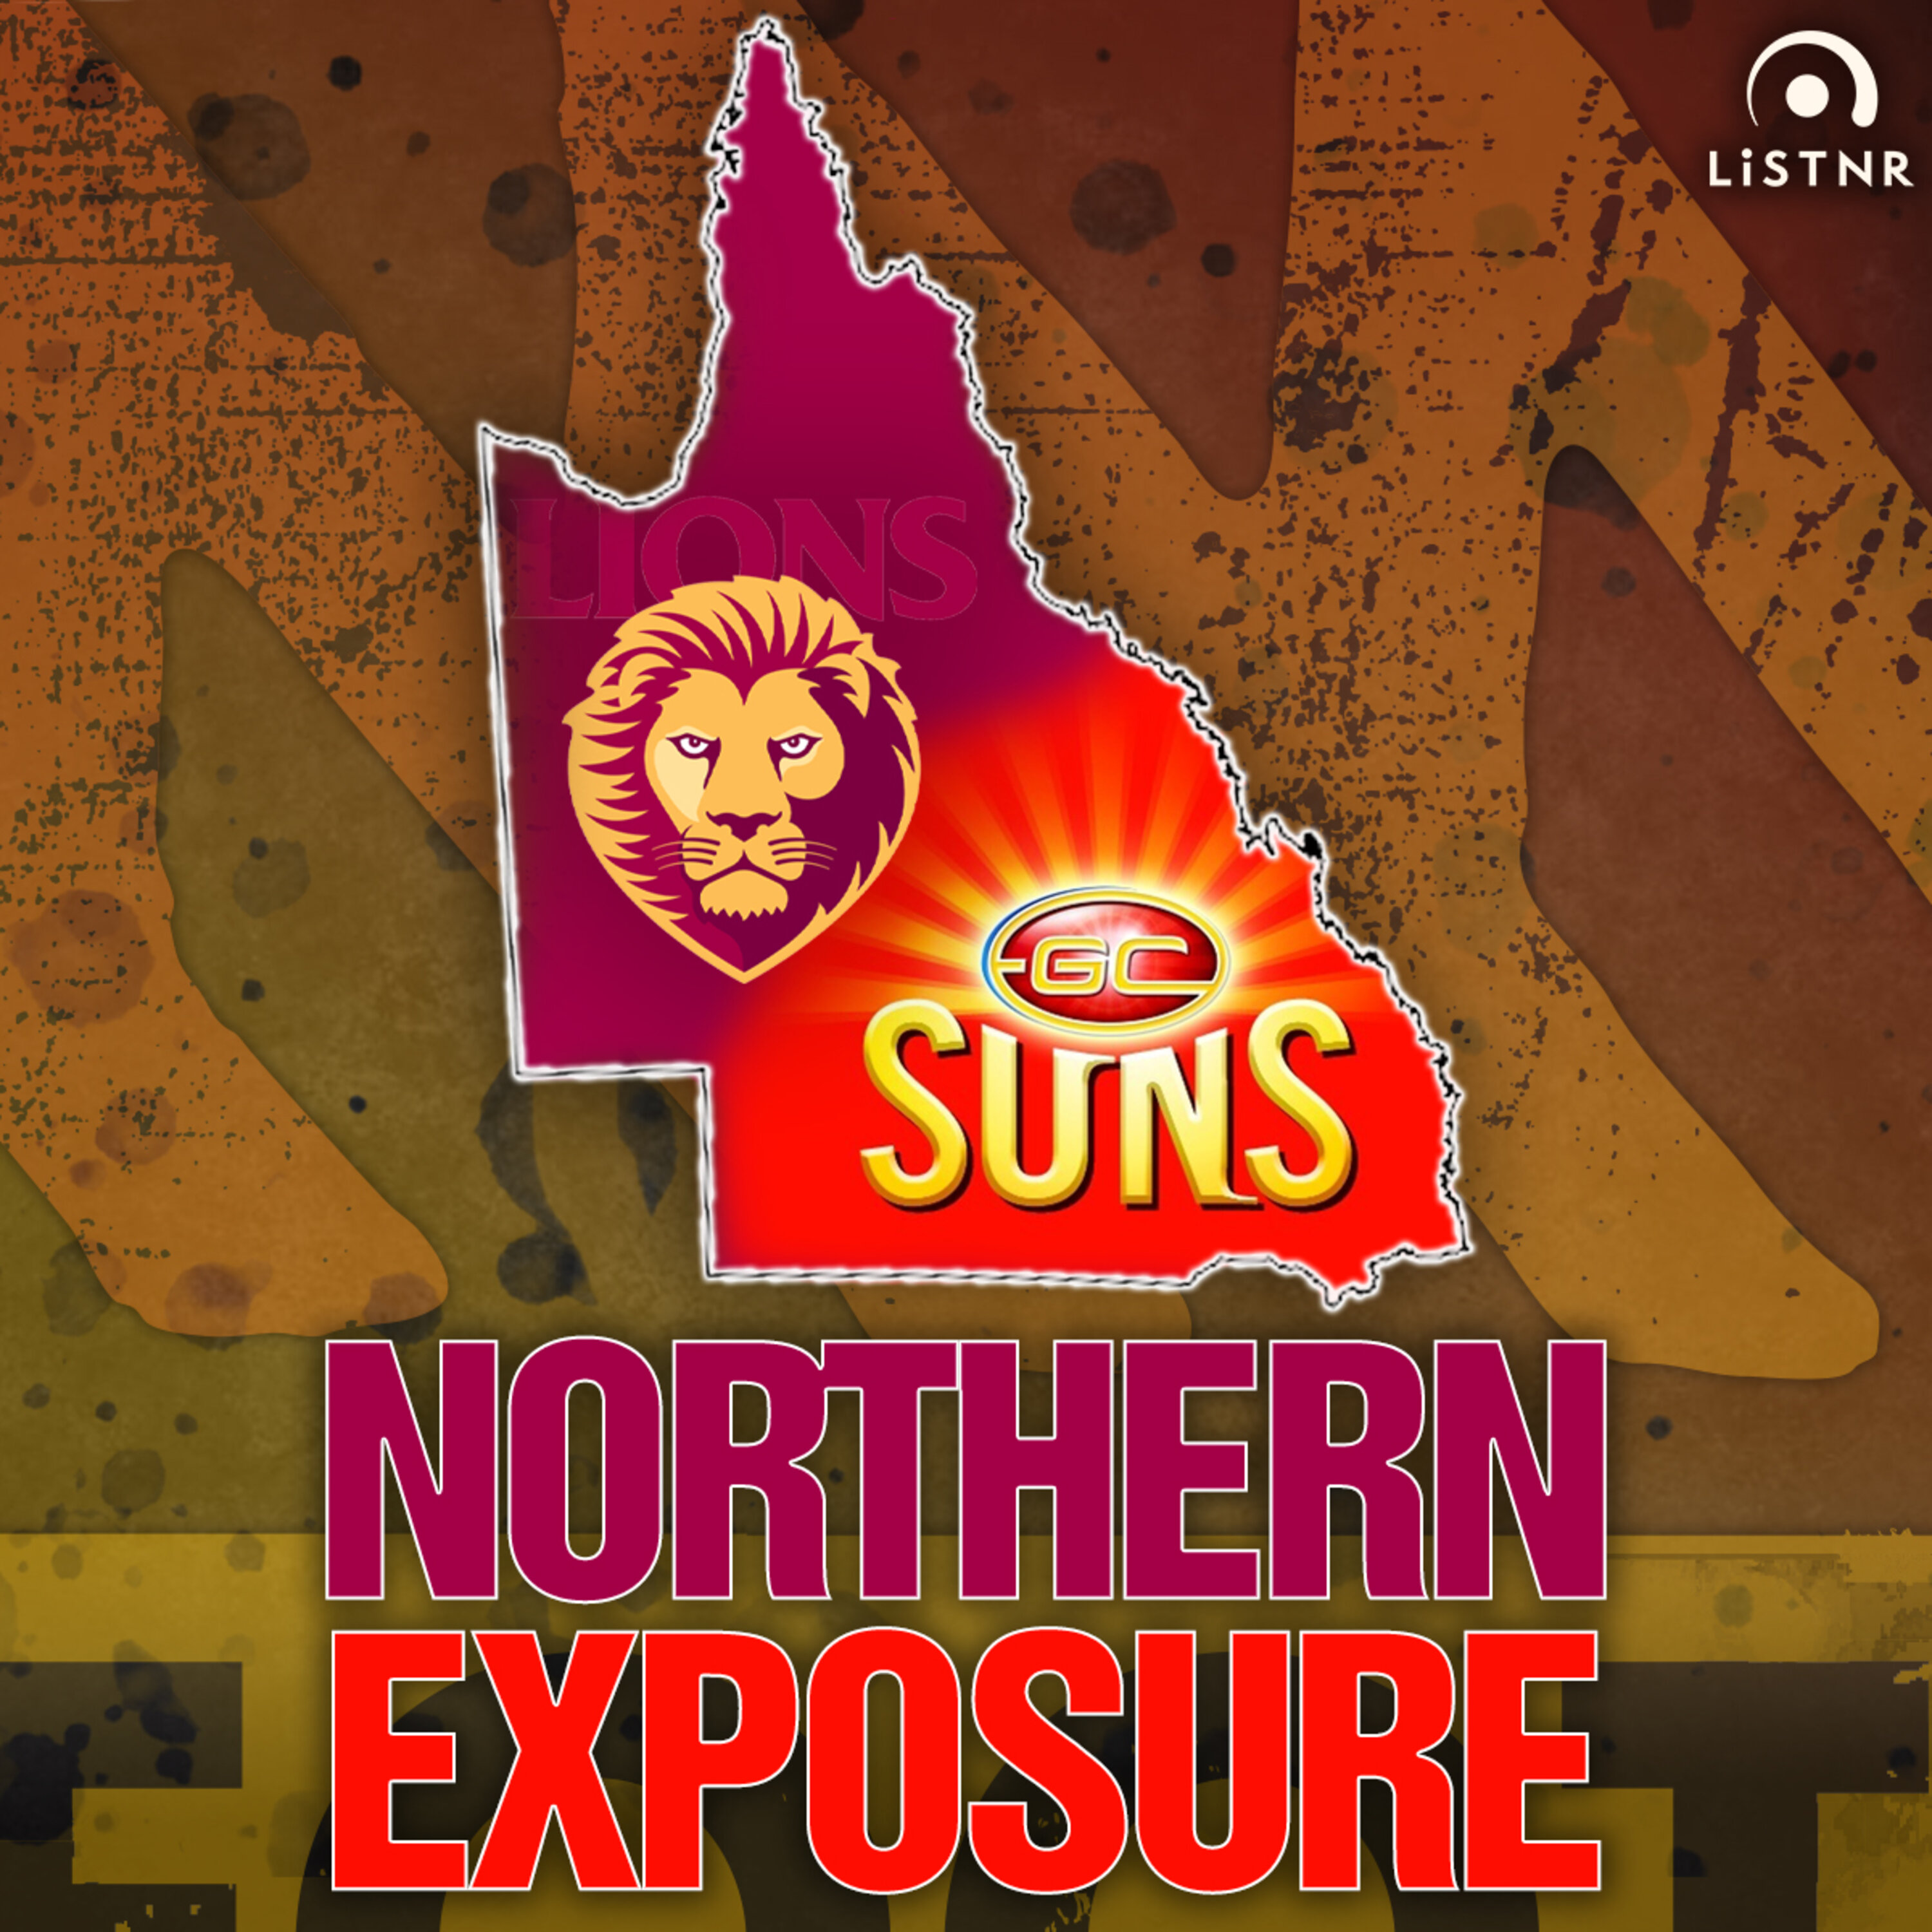 Northern Exposure | Full Lions v Tigers preview, is Dusty a red herring, and a potential risky debut